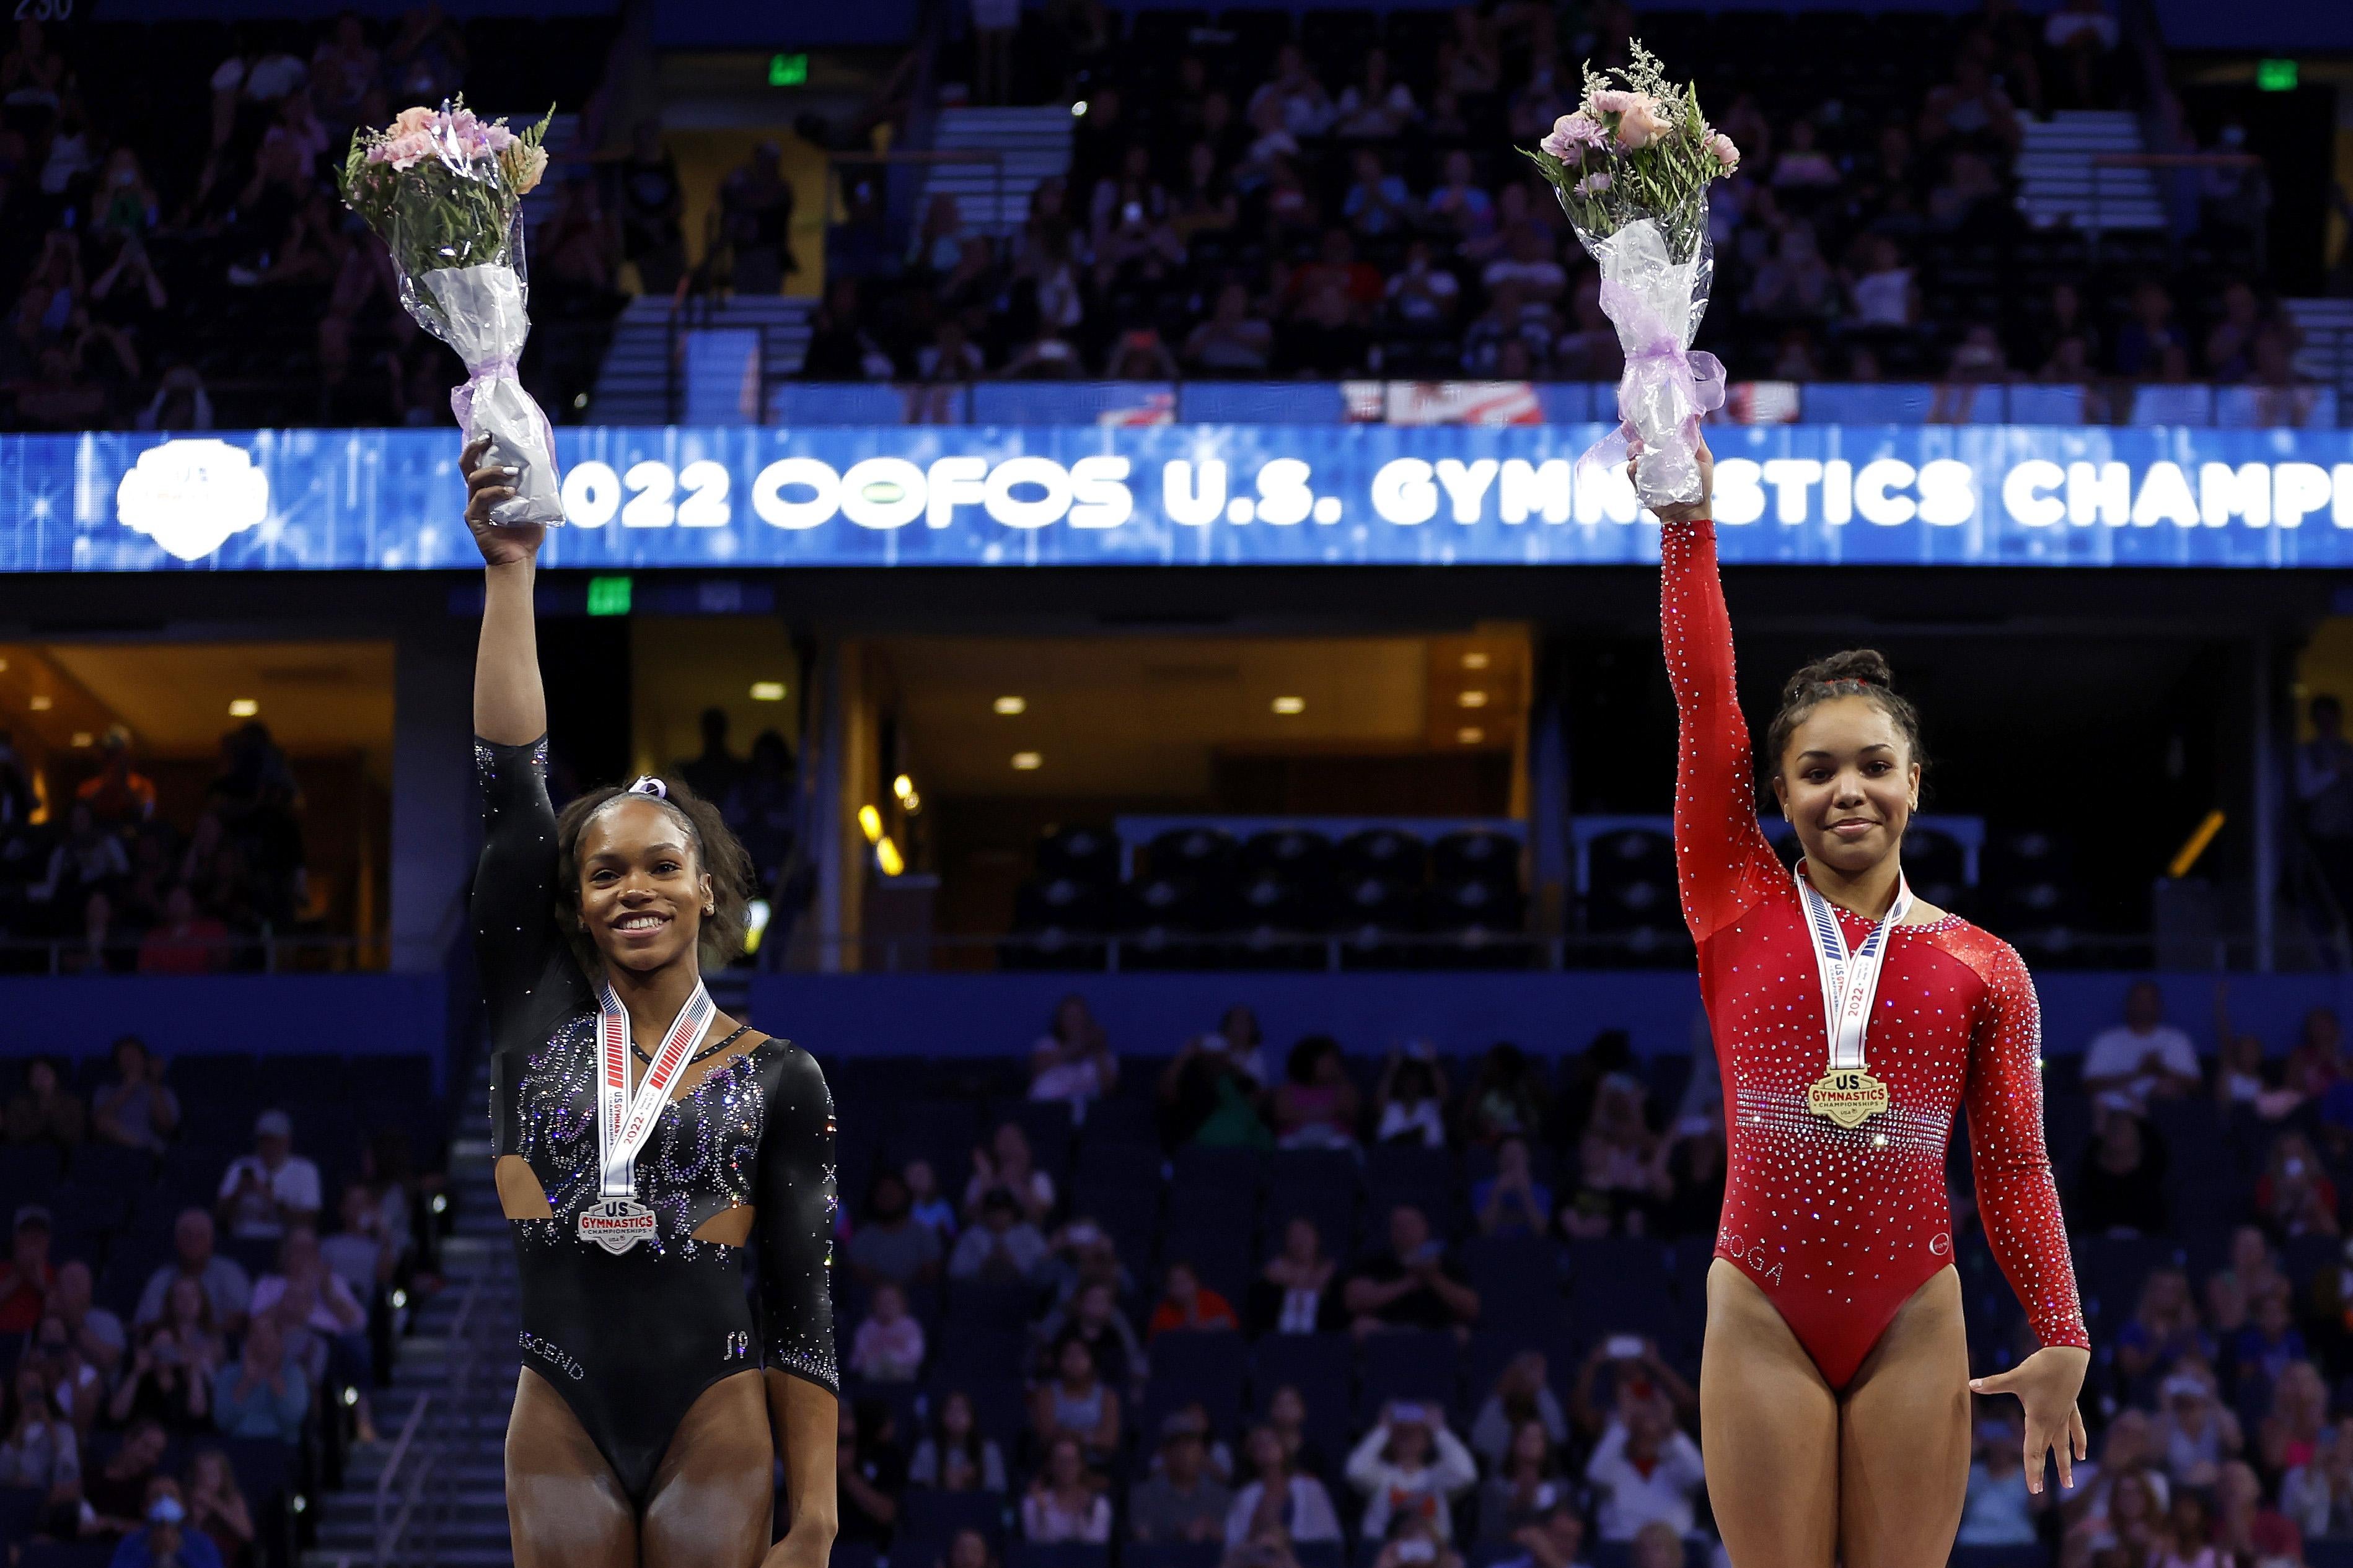 Jones and McClain lift bouquets and smile on the podium with medals around their neck